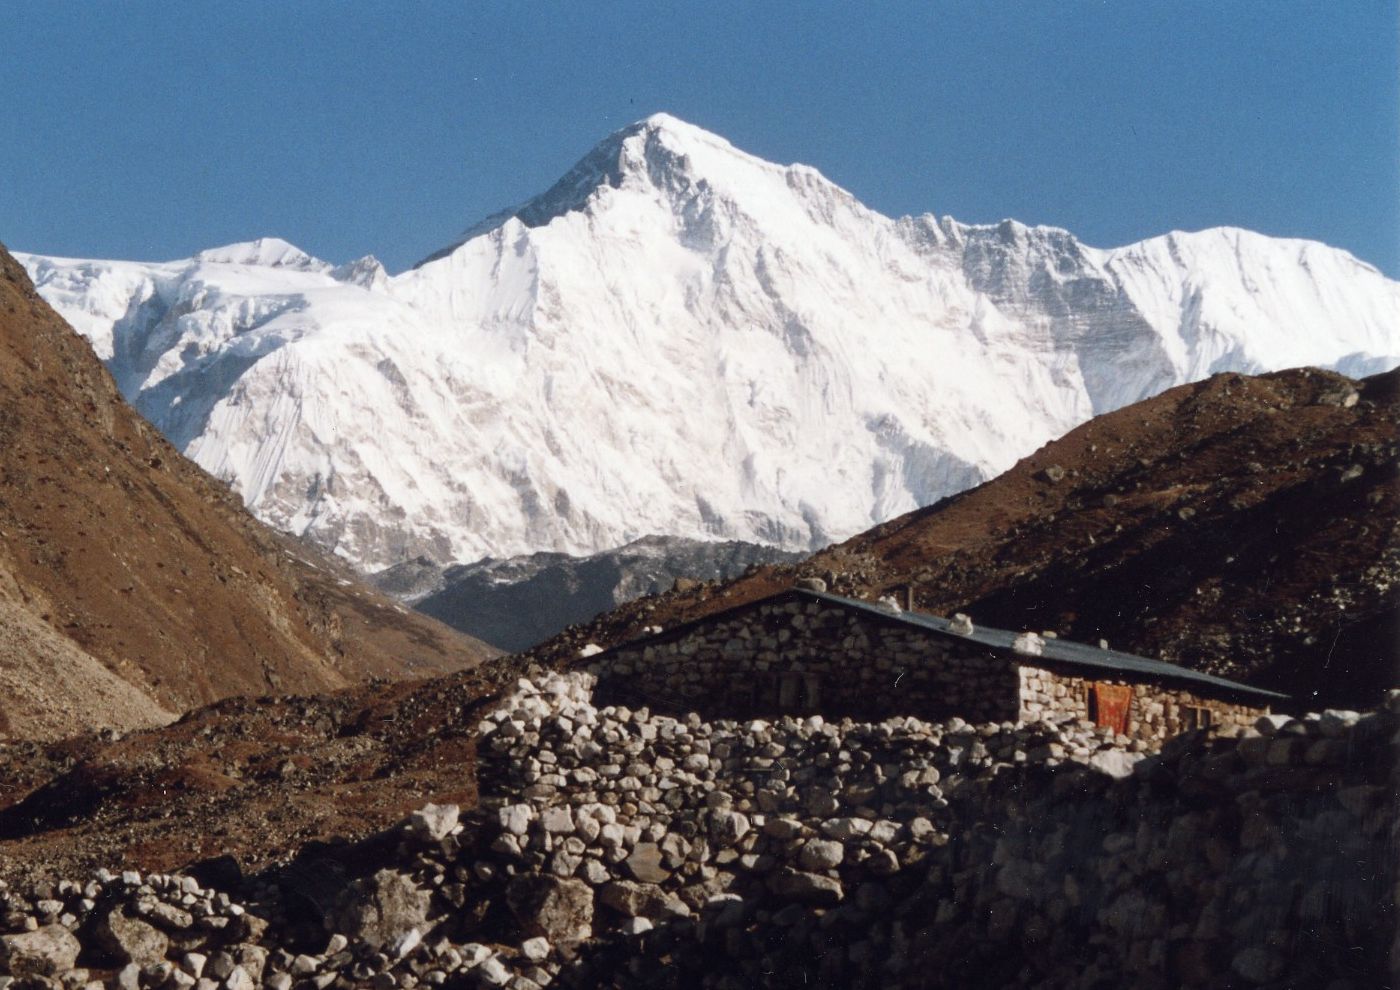 Cho Oyu, the sixth highest peak on Earth at 26,906 ft.